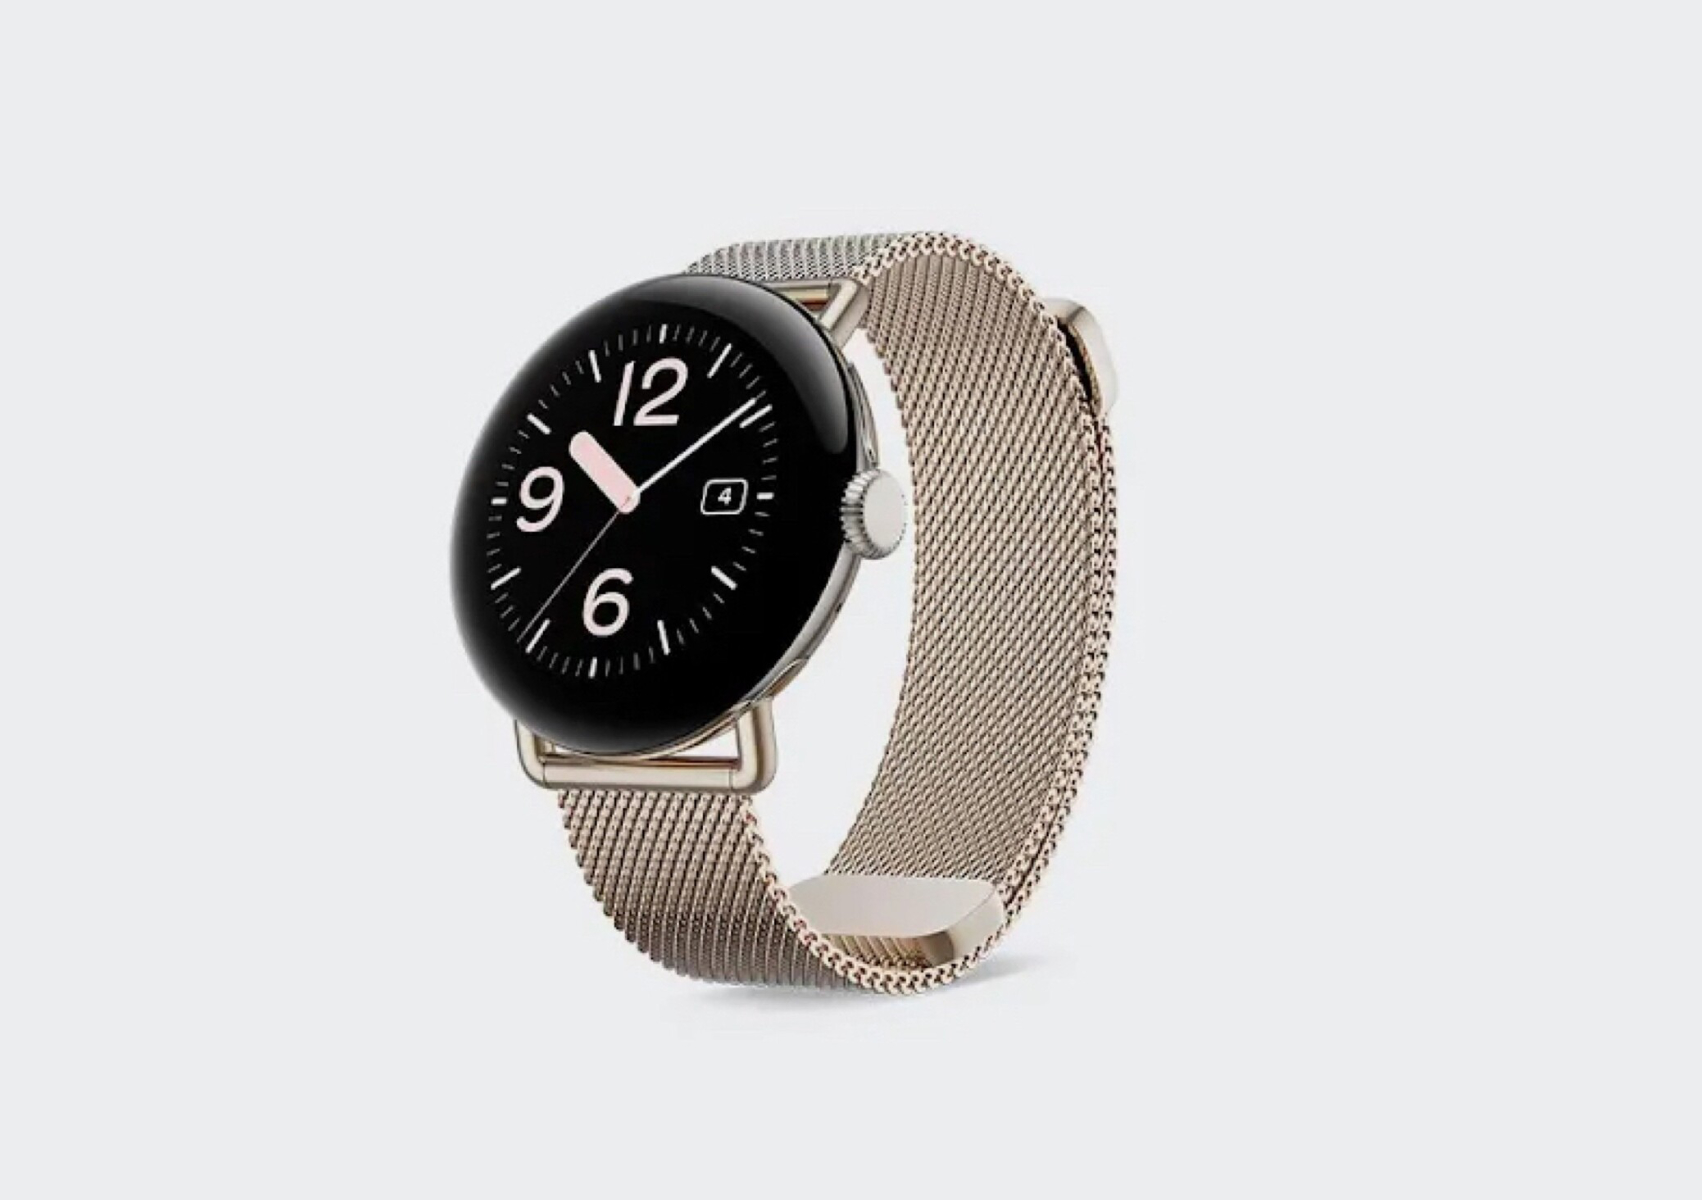 Full Google Pixel Watch 2 product page leaks before official launch -   News